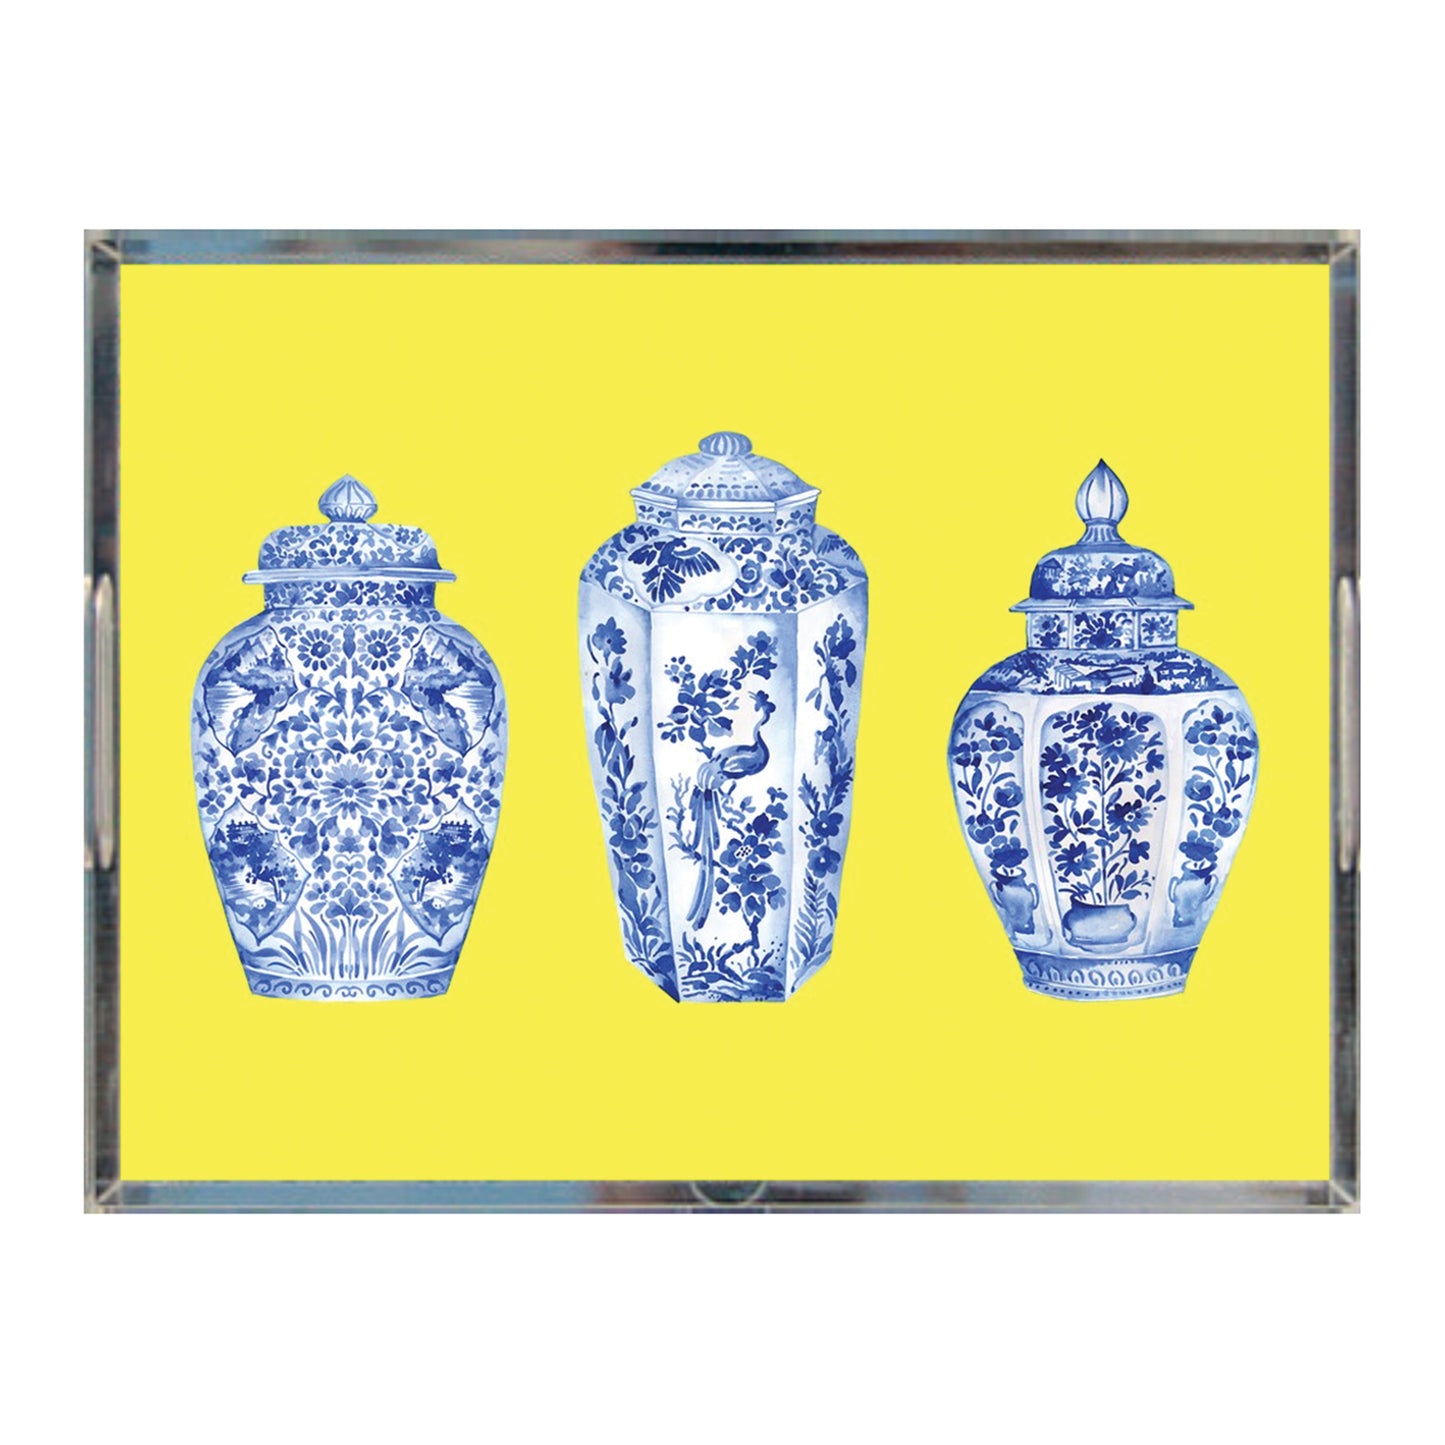 Blue & White Ginger Jars Print Decorative Tray, Serving Tray for Drinks, Yellow